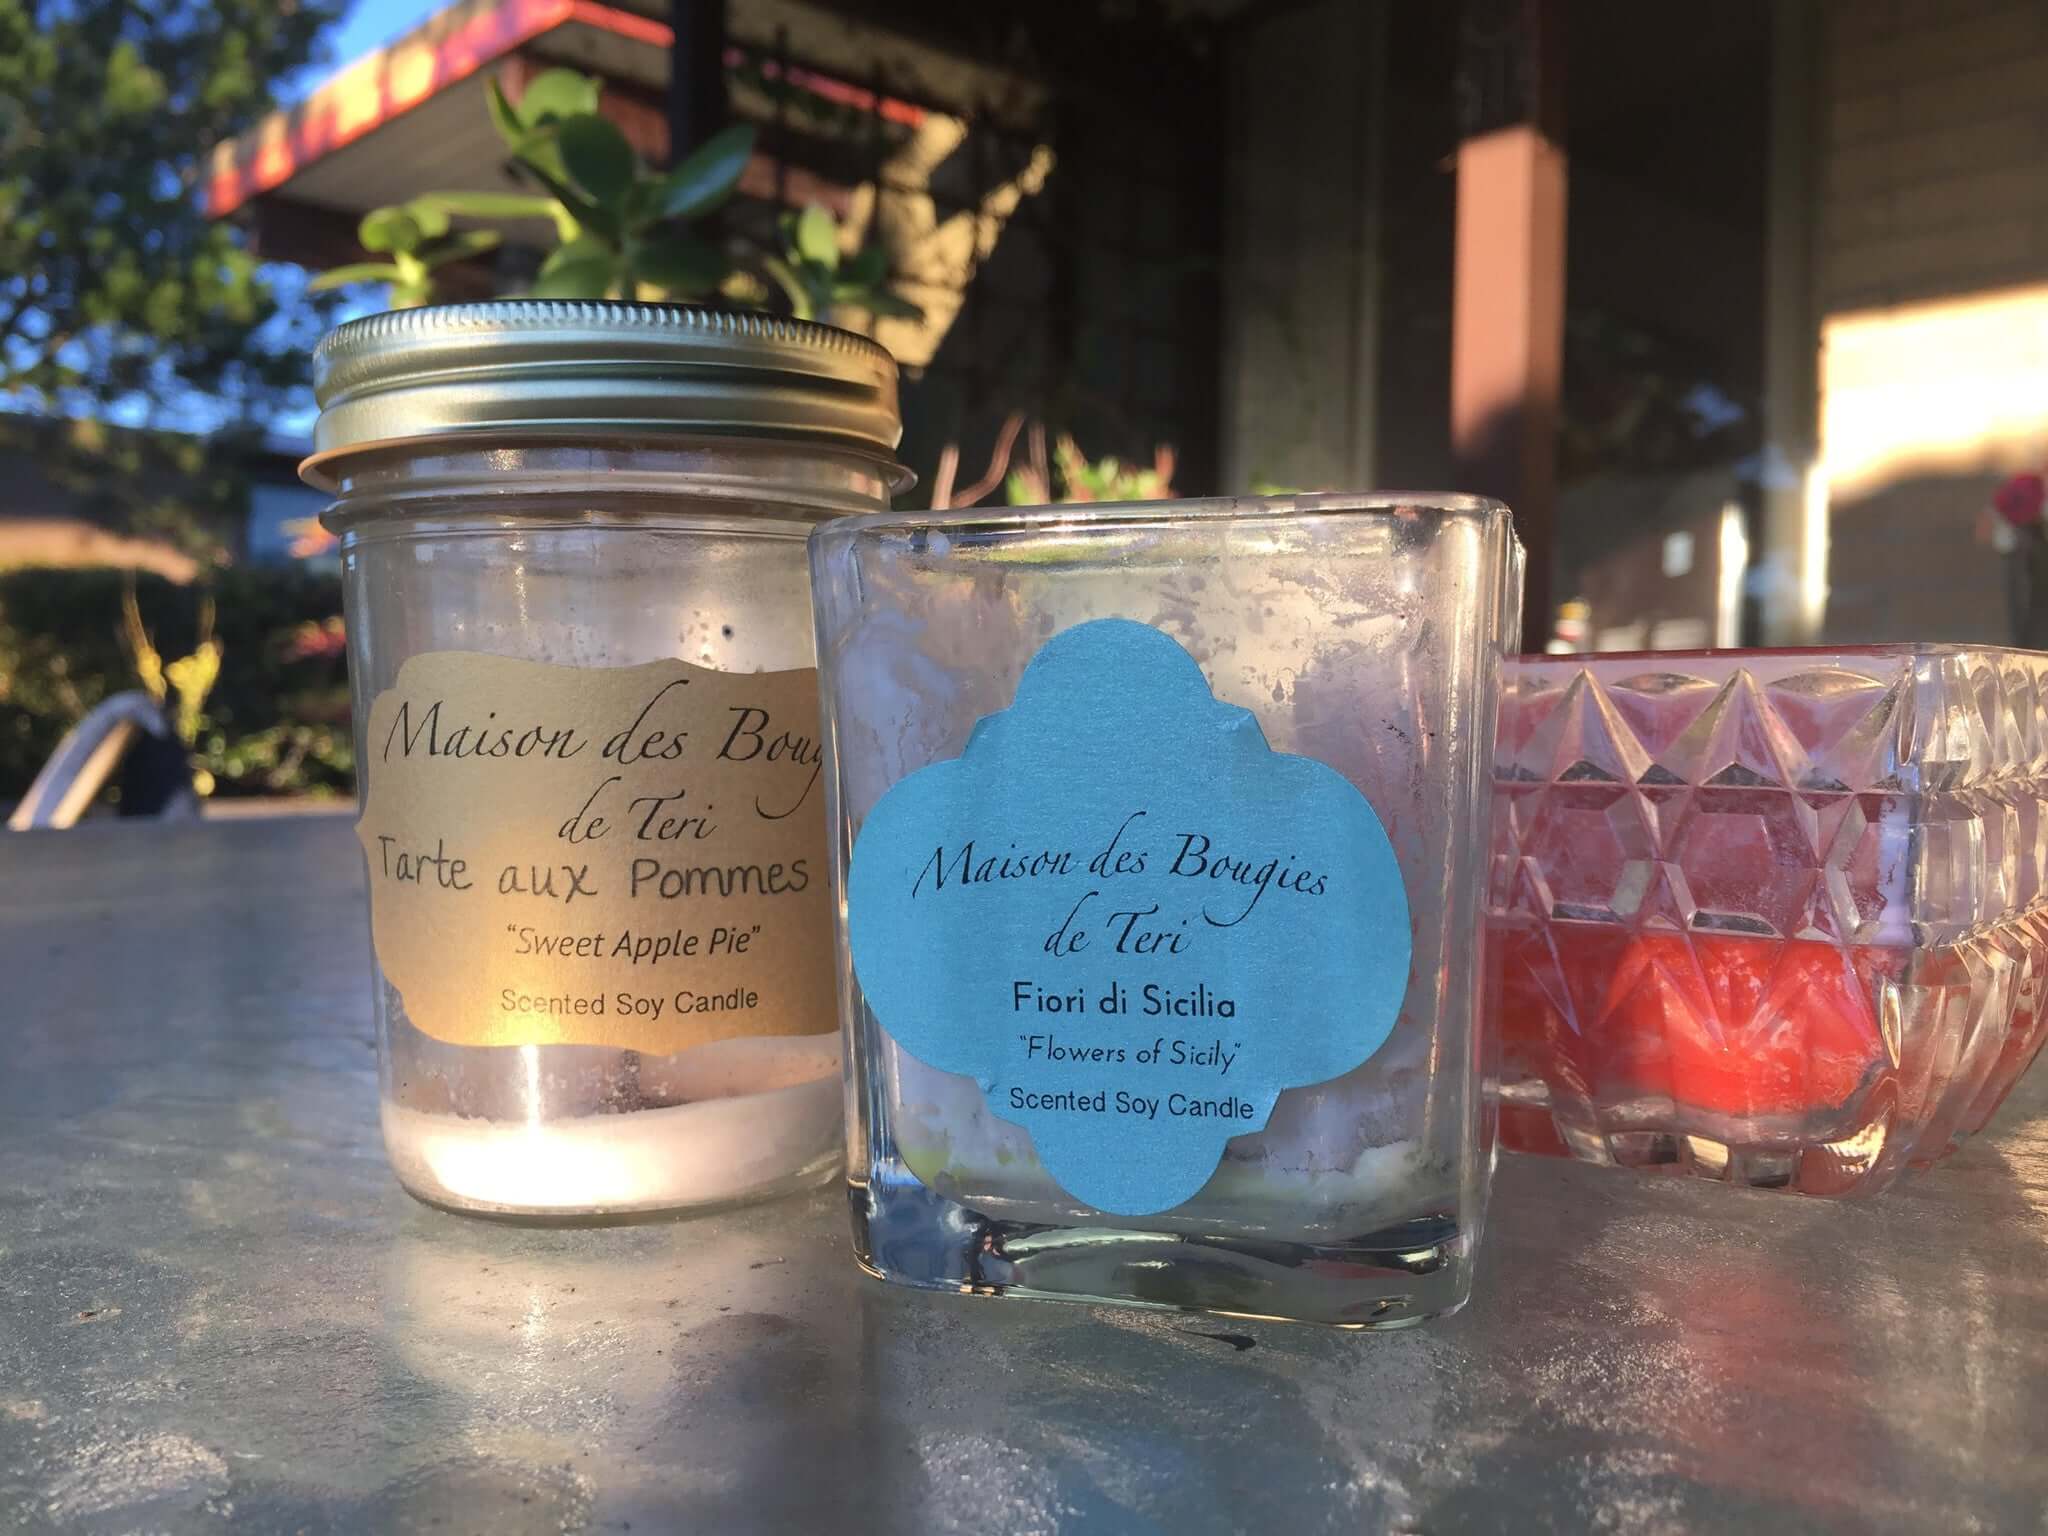 The Evolution of the Harlem Candle Co.